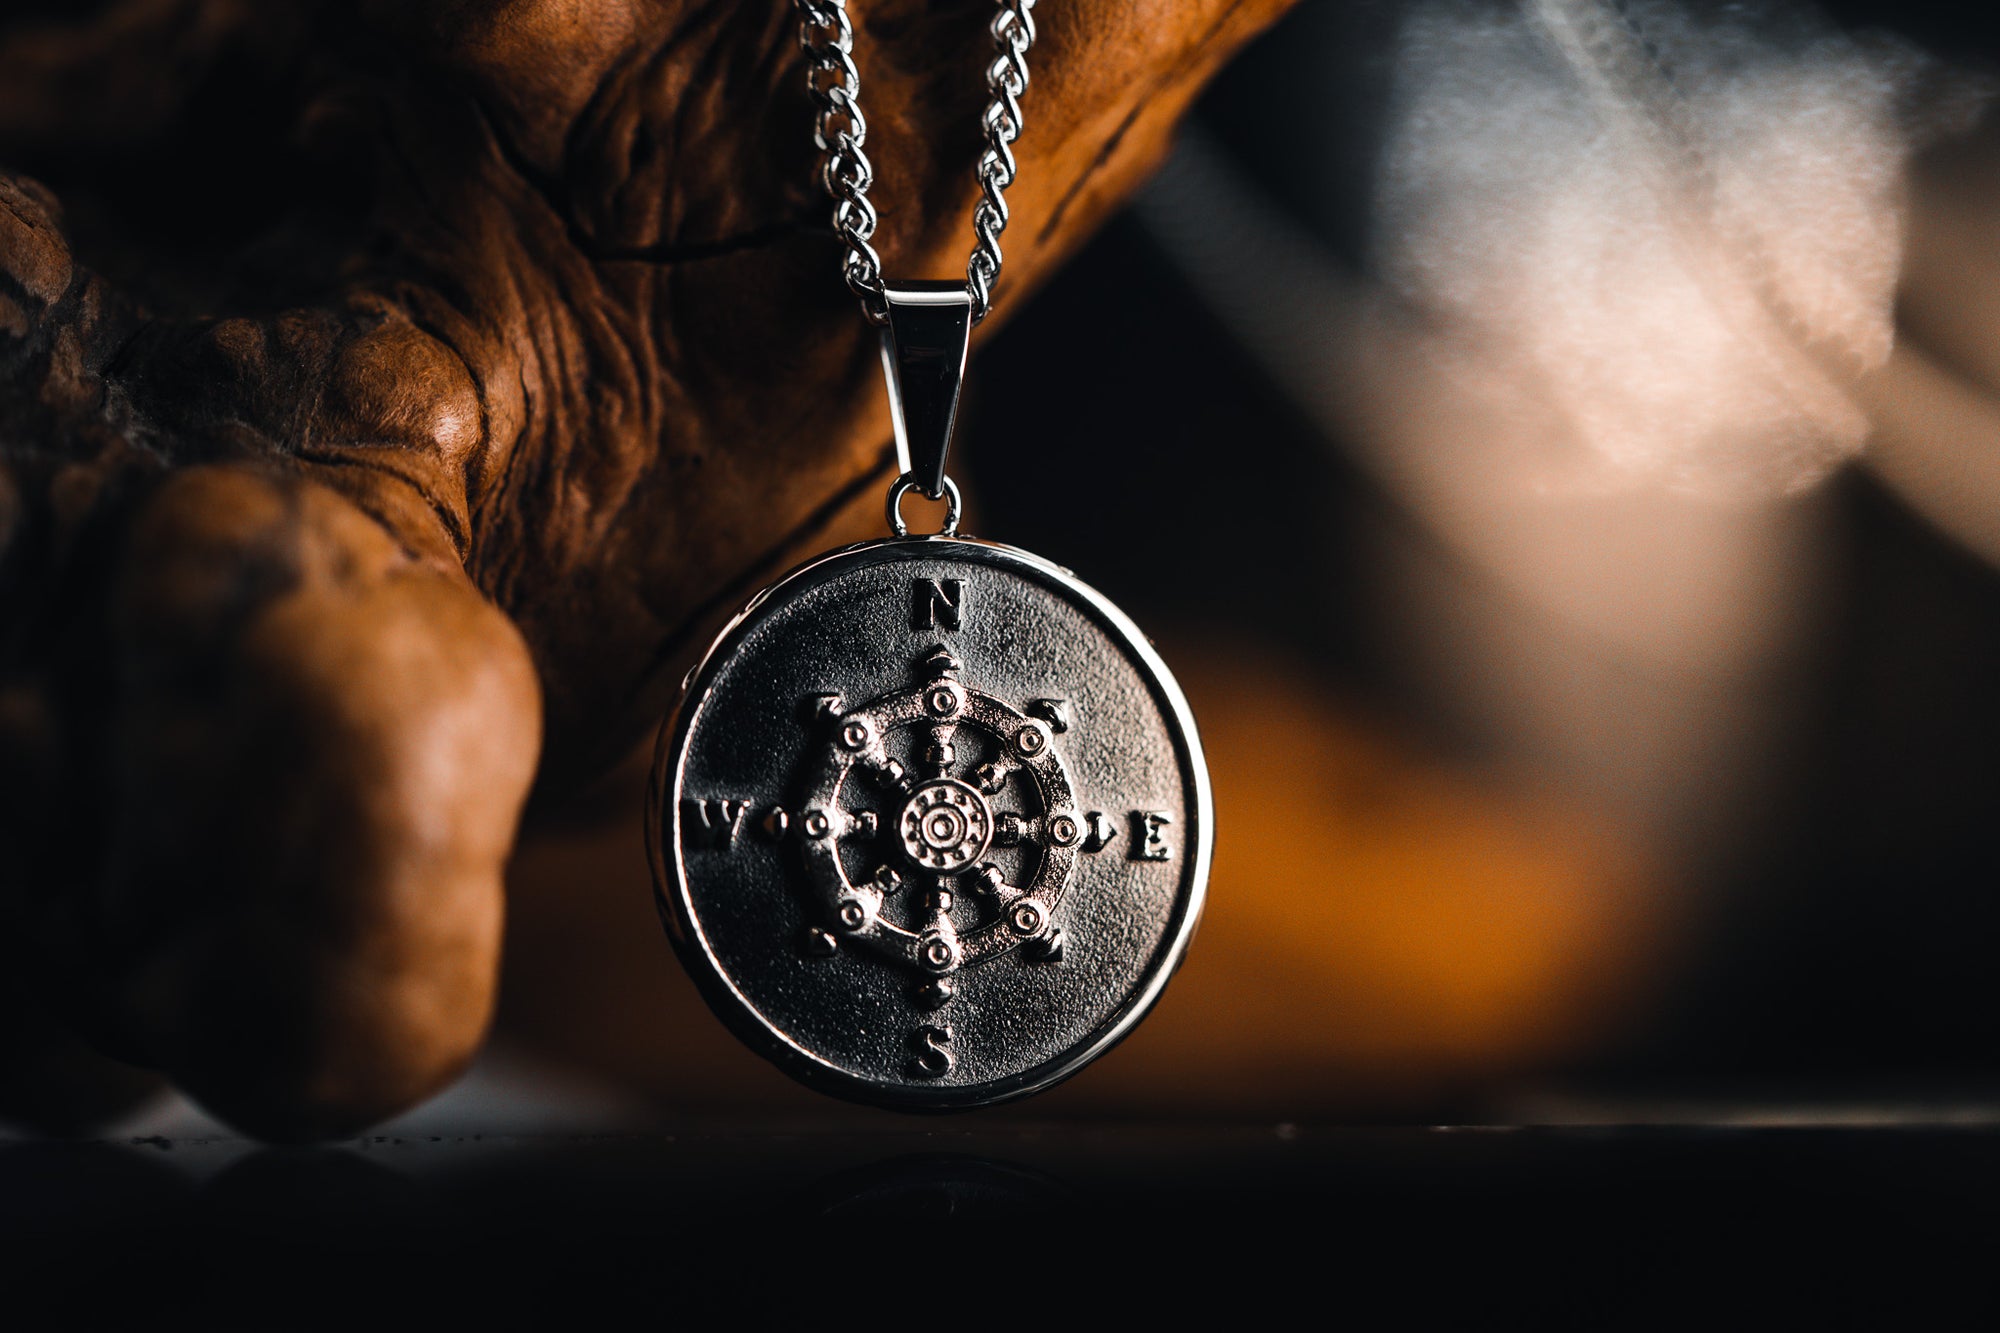 Stainless Steel Compass Pendant